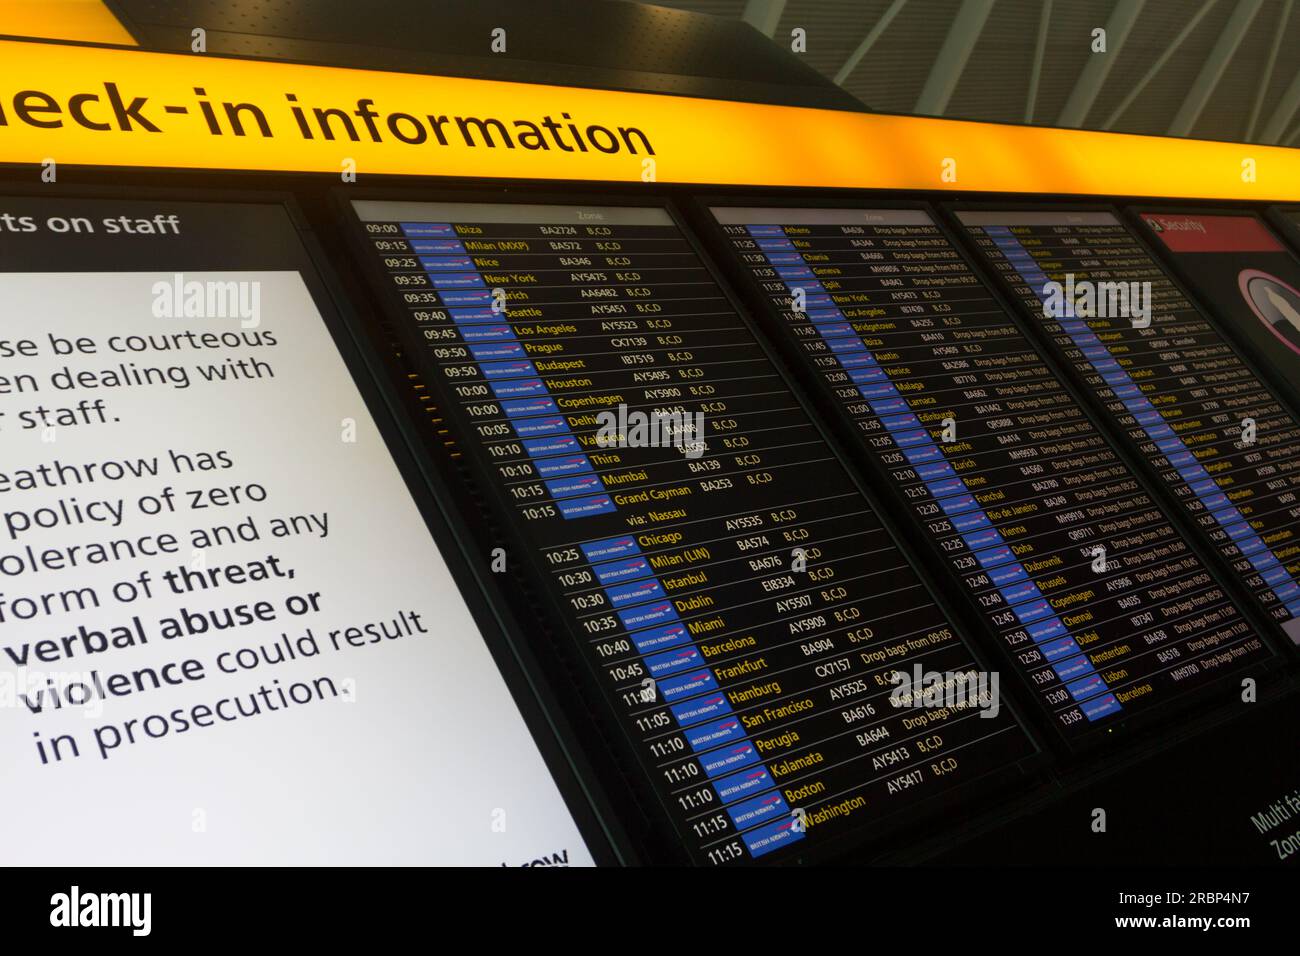 A flights arrival and check-in board in an airport. Panel also shows notice on staff Stock Photo